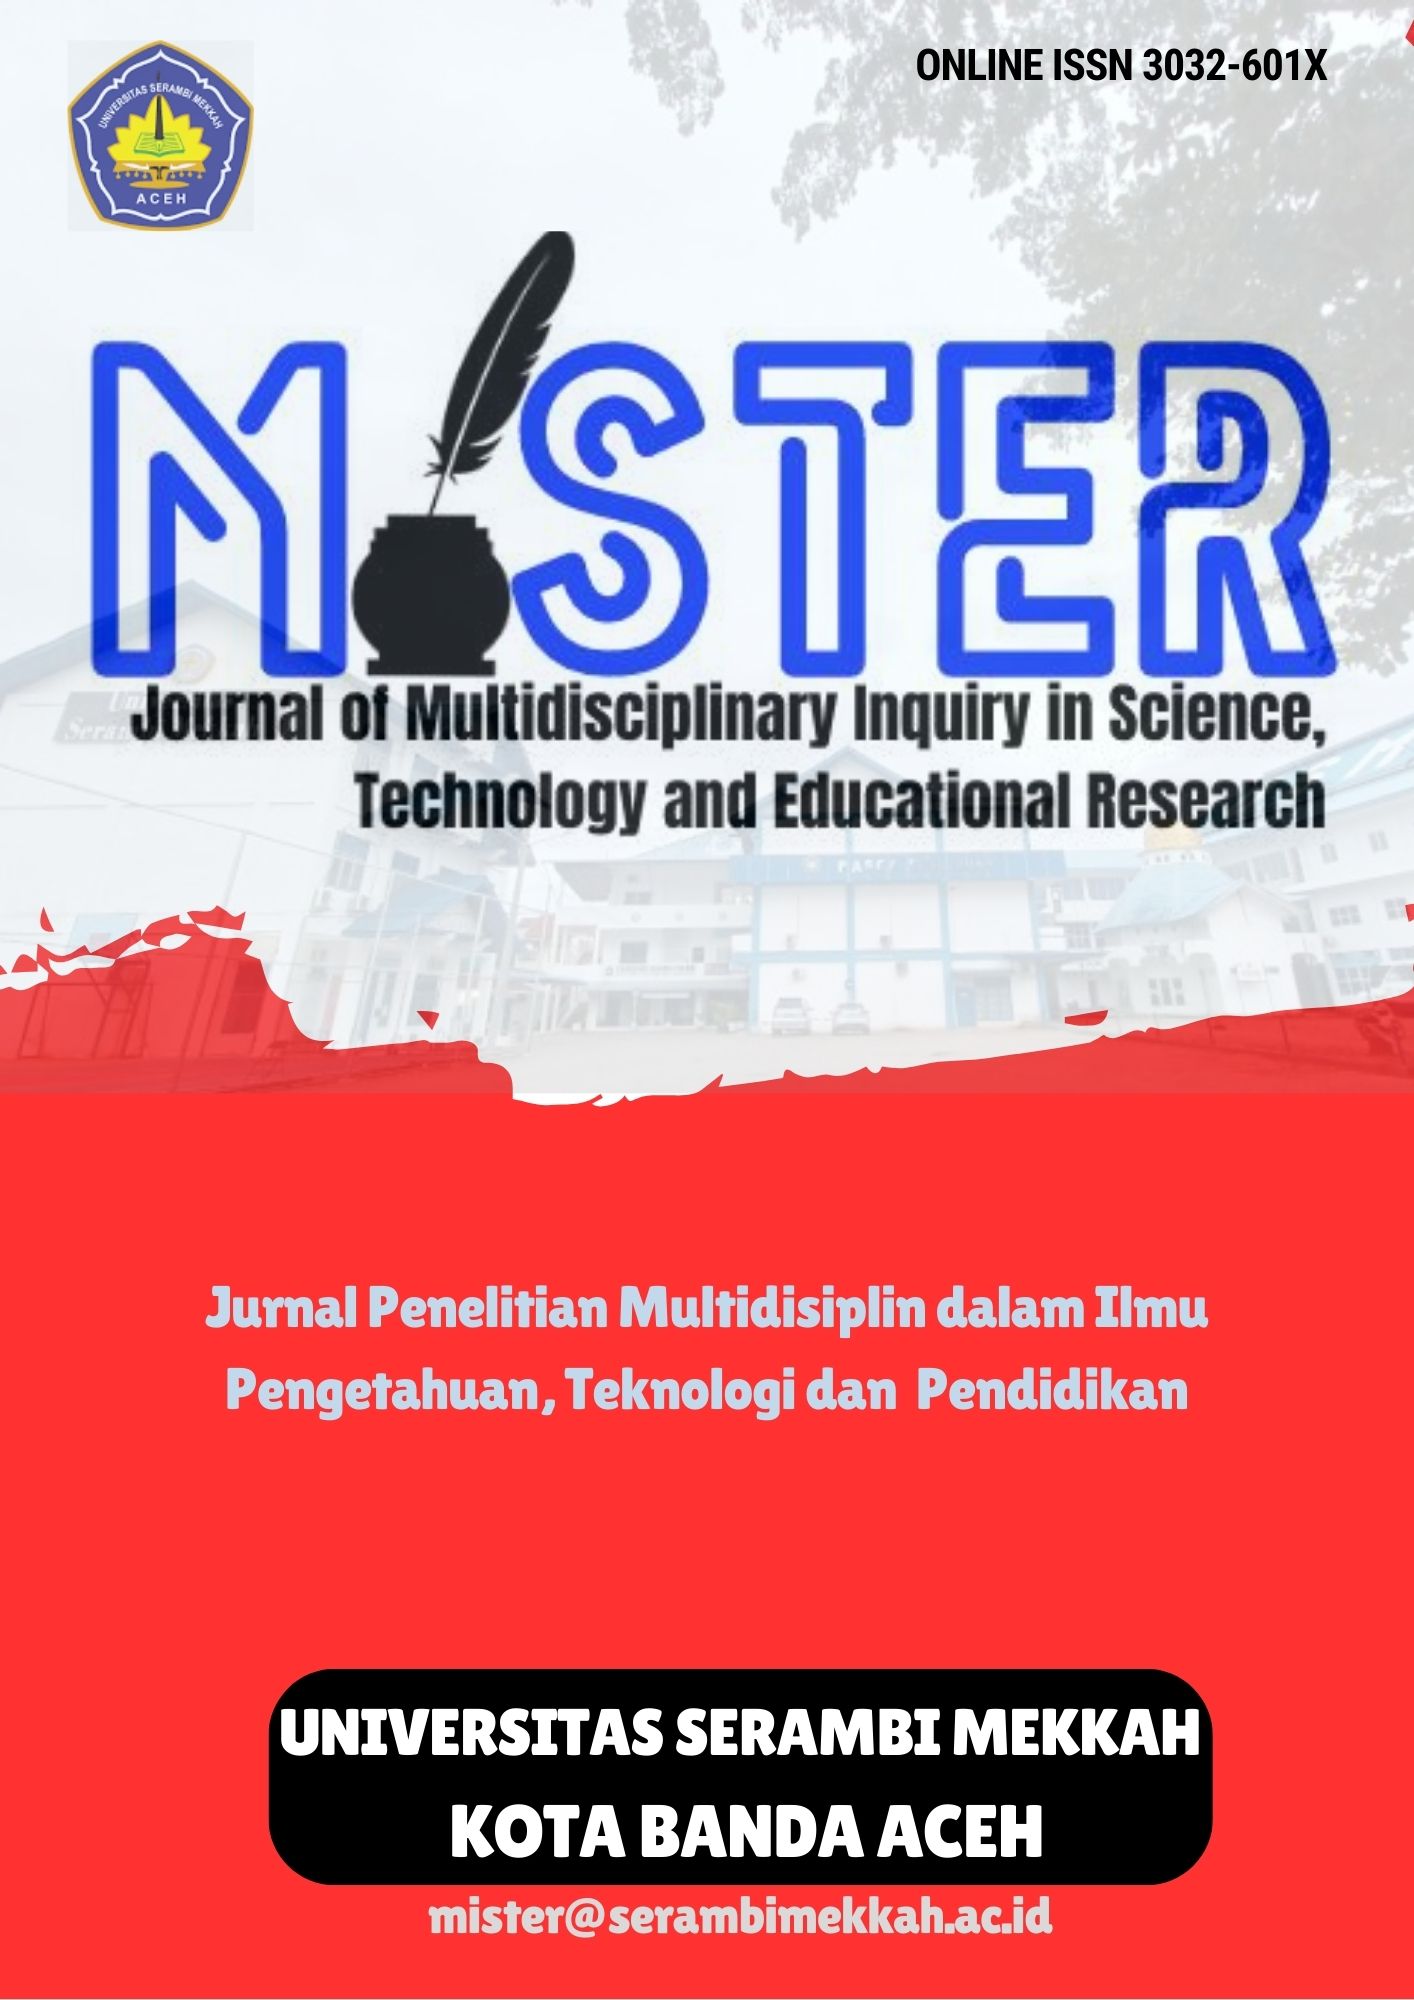 MISTER: Journal of Multidisciplinary Inquiry in Science, Technology and Educational Research